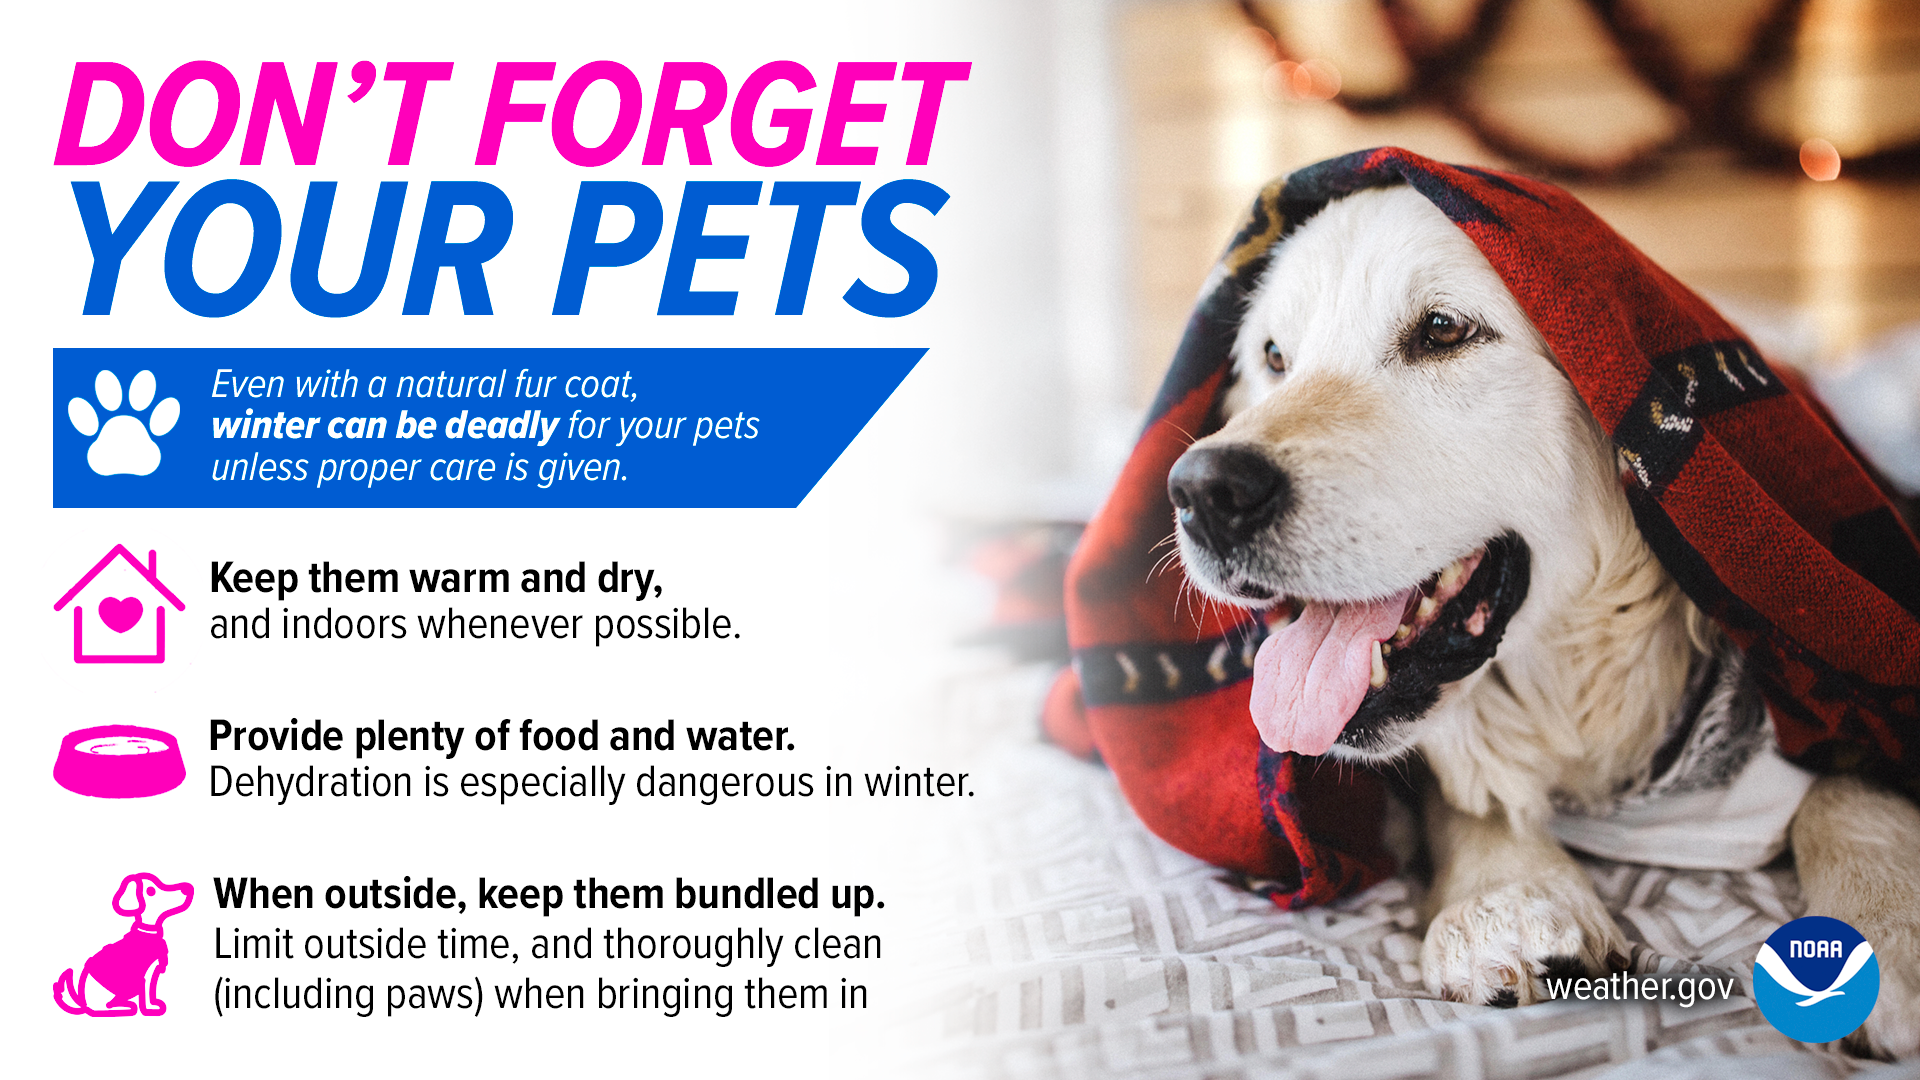 Don’t forget your pets! 
Even with a natural fur coat, winter can be deadly for your pets unless proper care is given.
Keep them warm and dry, and indoors whenever possible.
Provide plenty of food and water. Dehydration is especially dangerous in winter.
When outside, keep them bundled up. Limit outside time, and thoroughly clean, including paws, when bringing them in.
